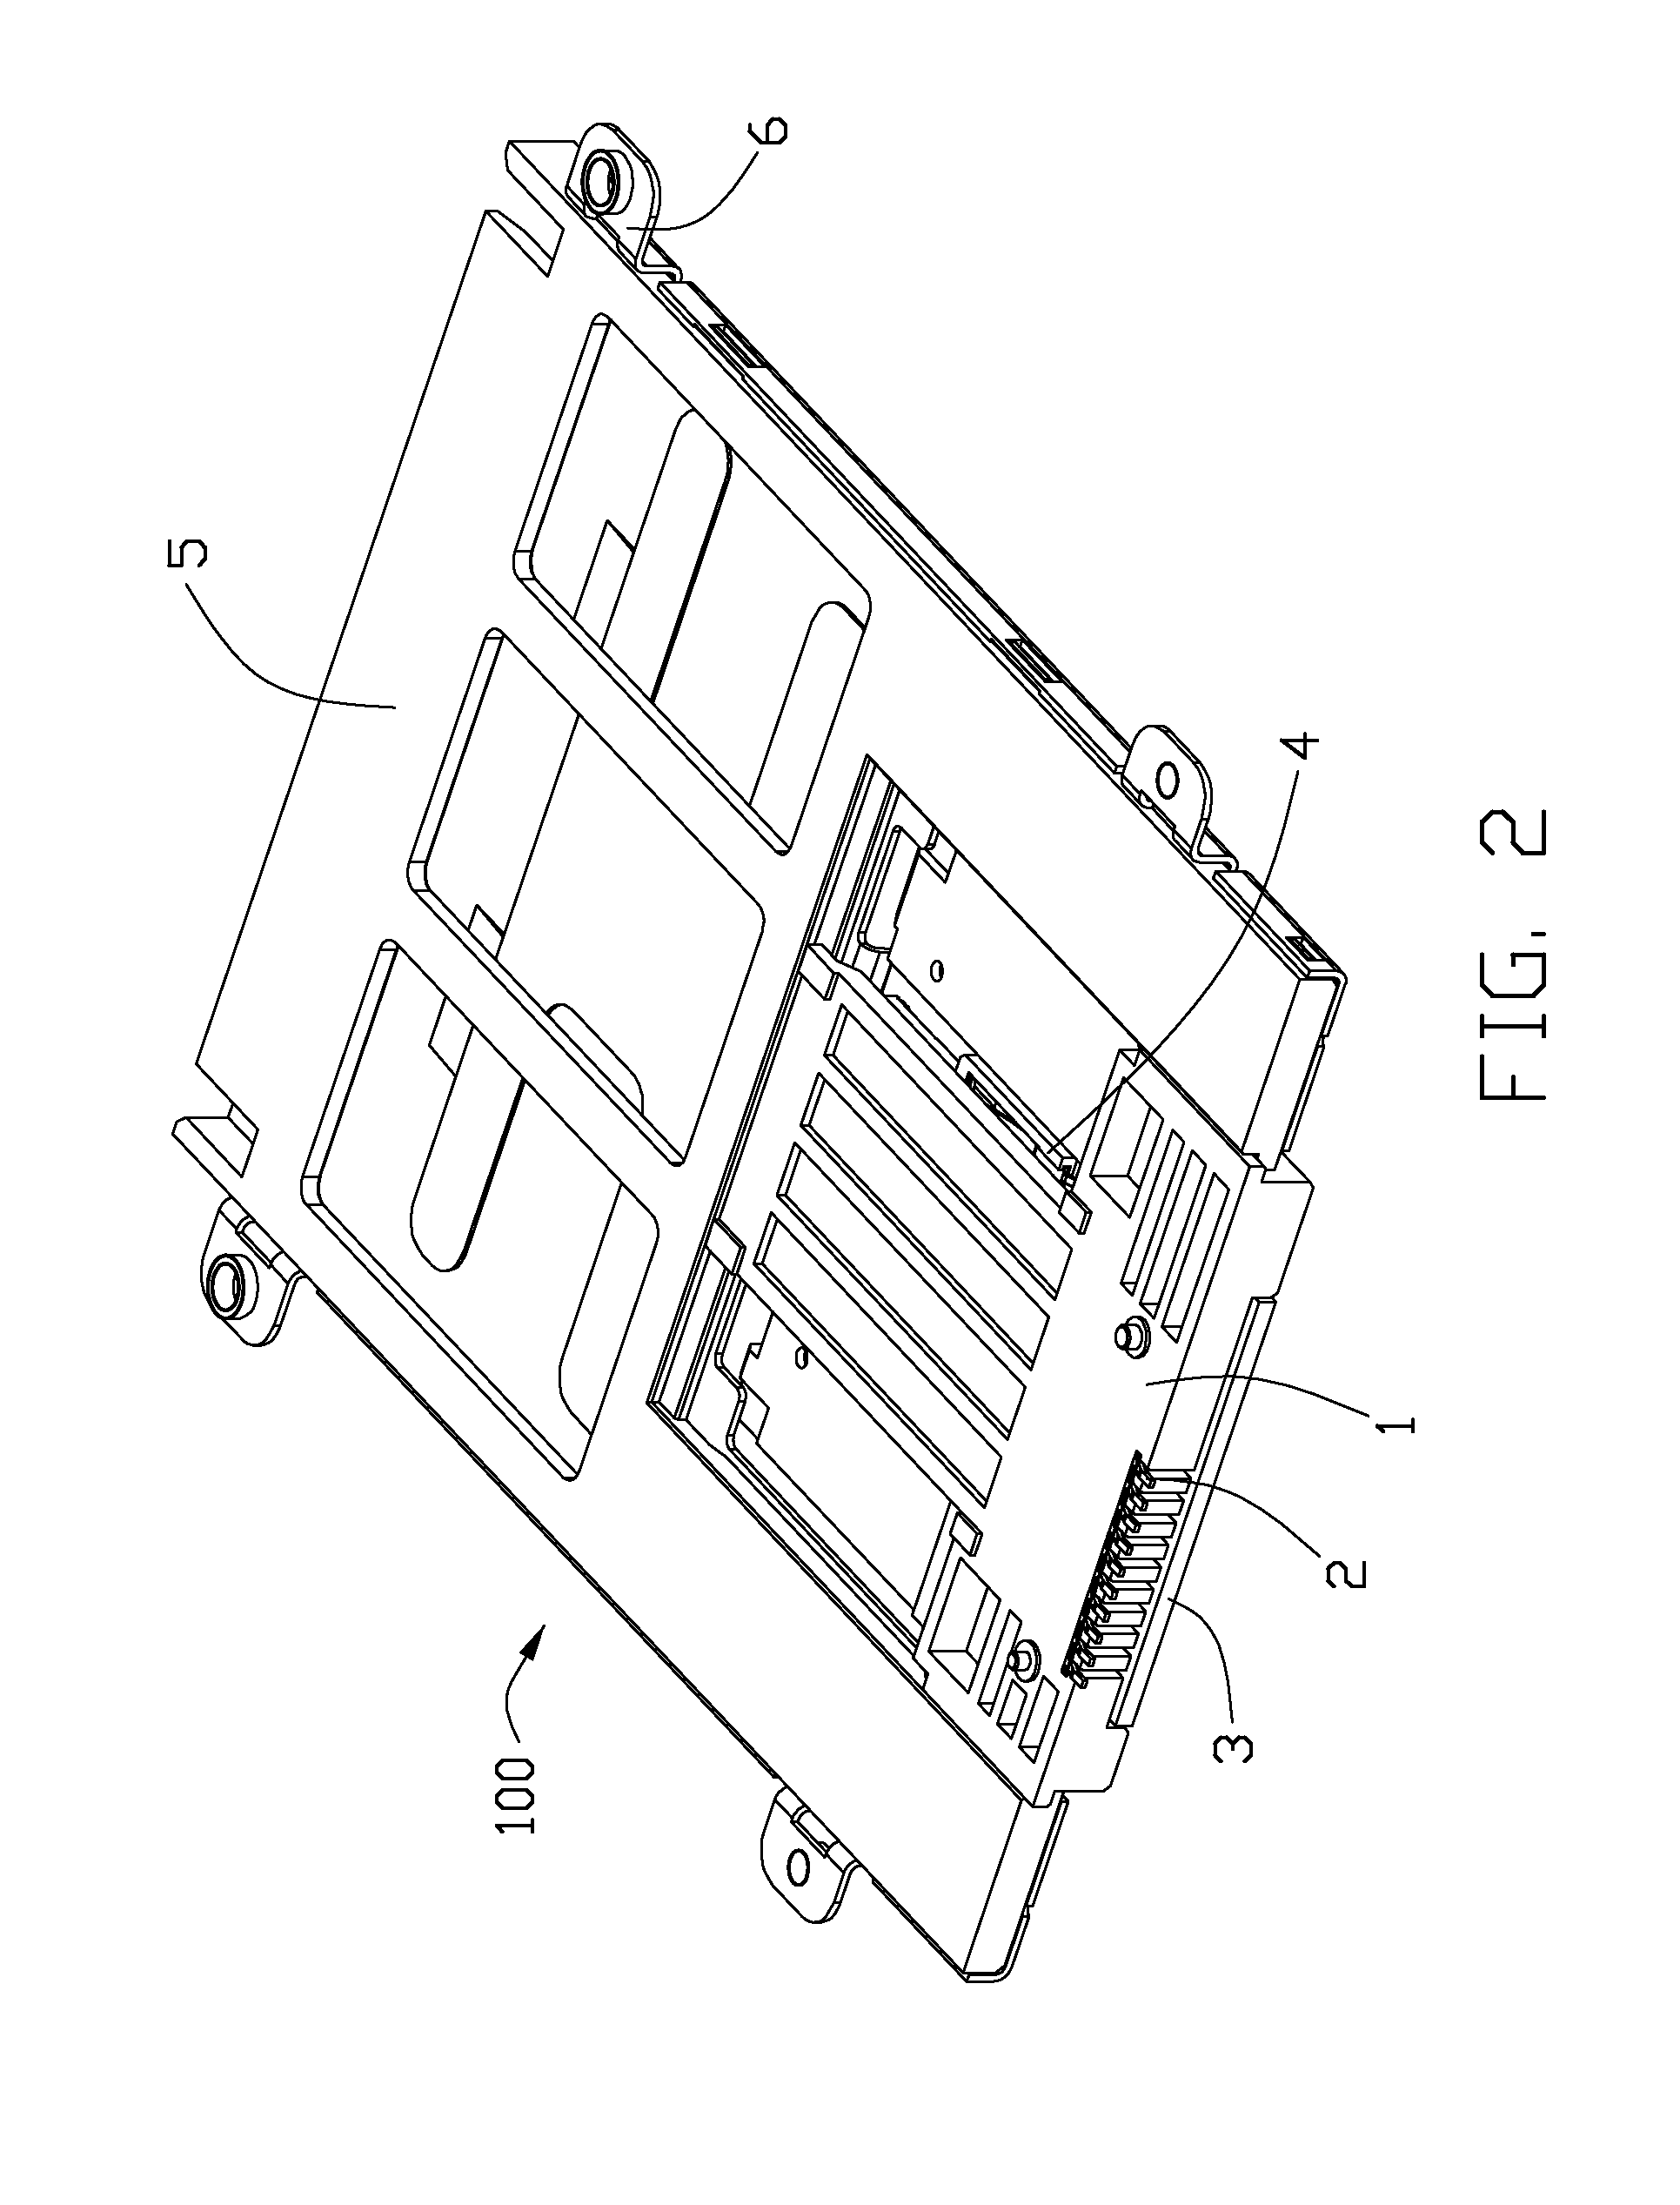 Electrical card connector with improved contacts arrangement